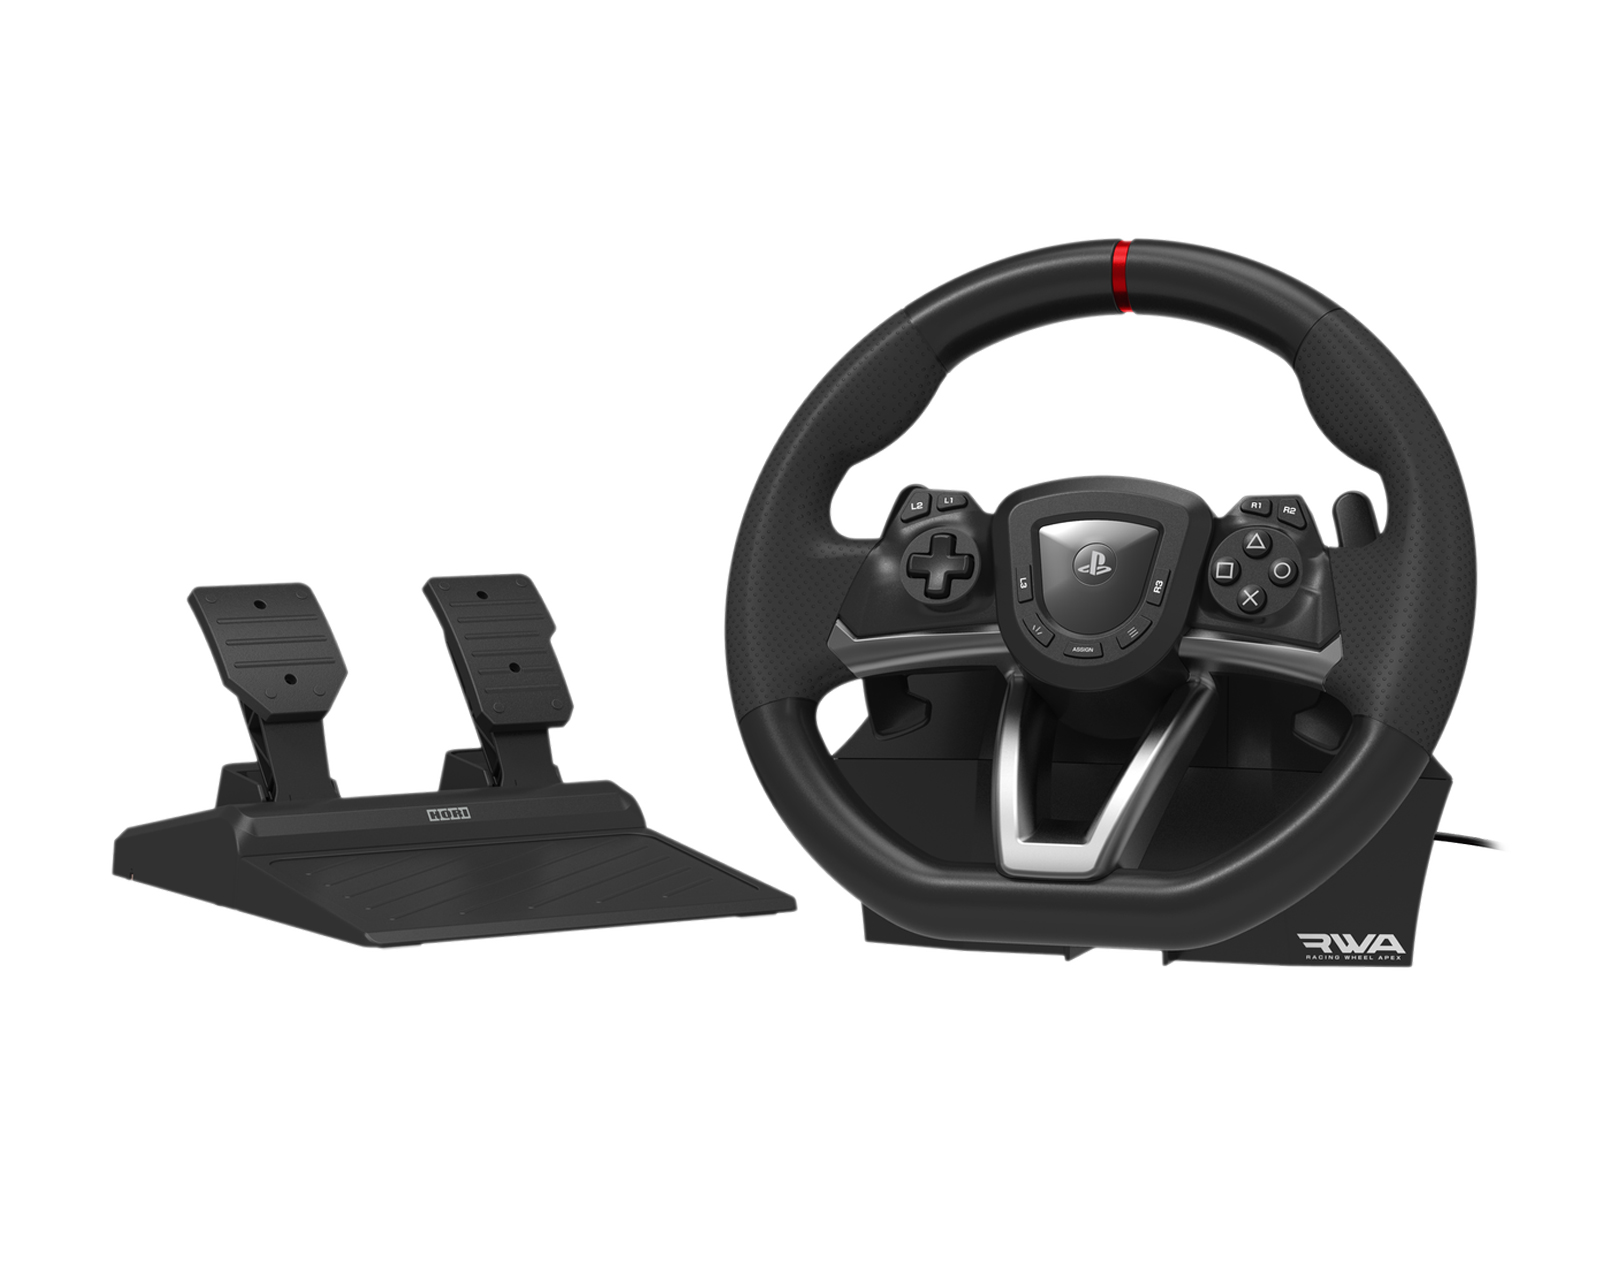 Hori Racing Wheel APEX for PlayStation 5 (PS5/PS4/PC)